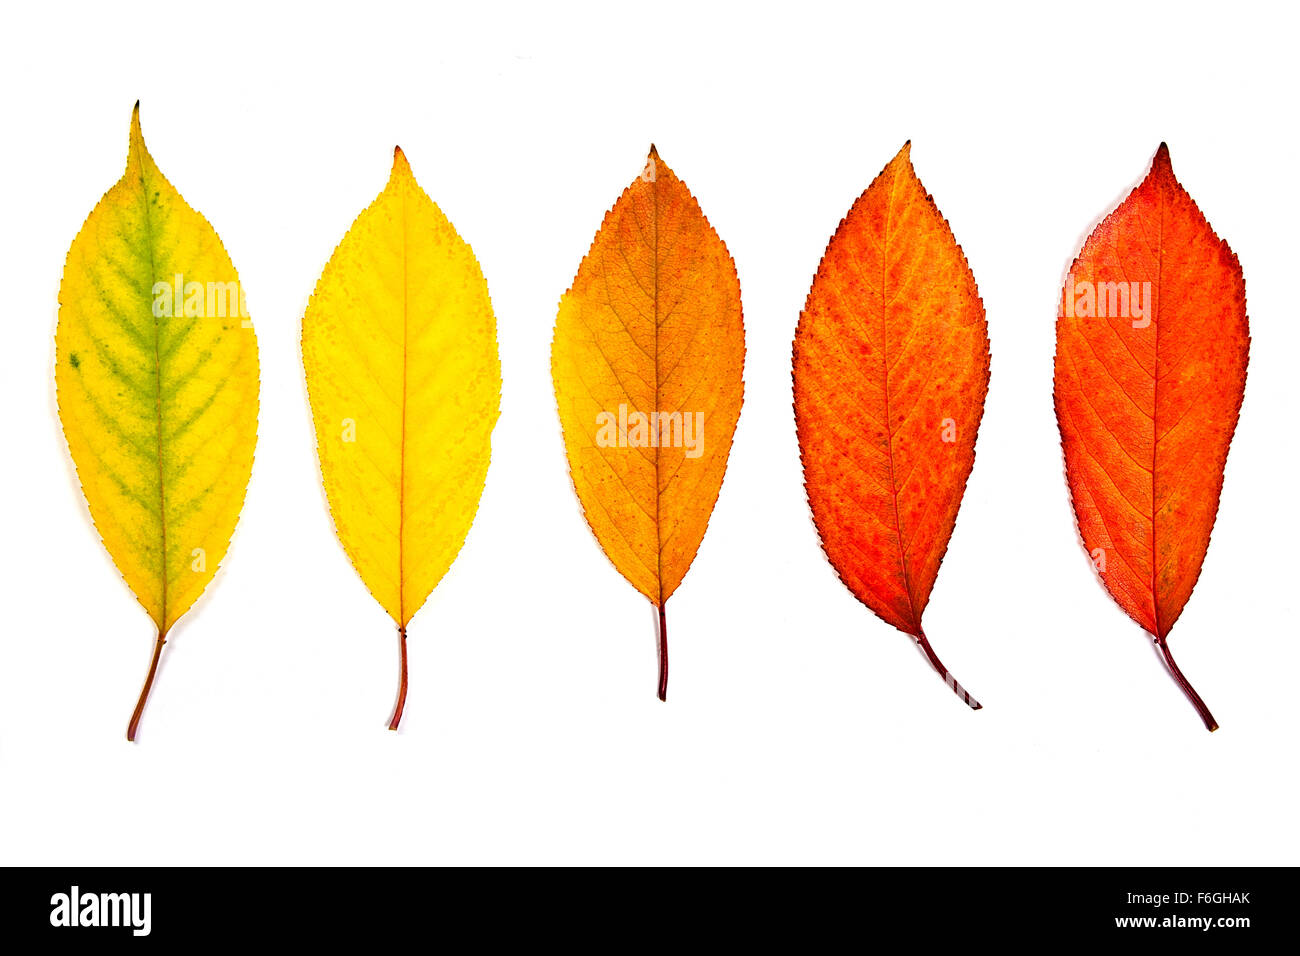 Autumn leaves of cherry tree isolated on white background. With clipping path. Stock Photo